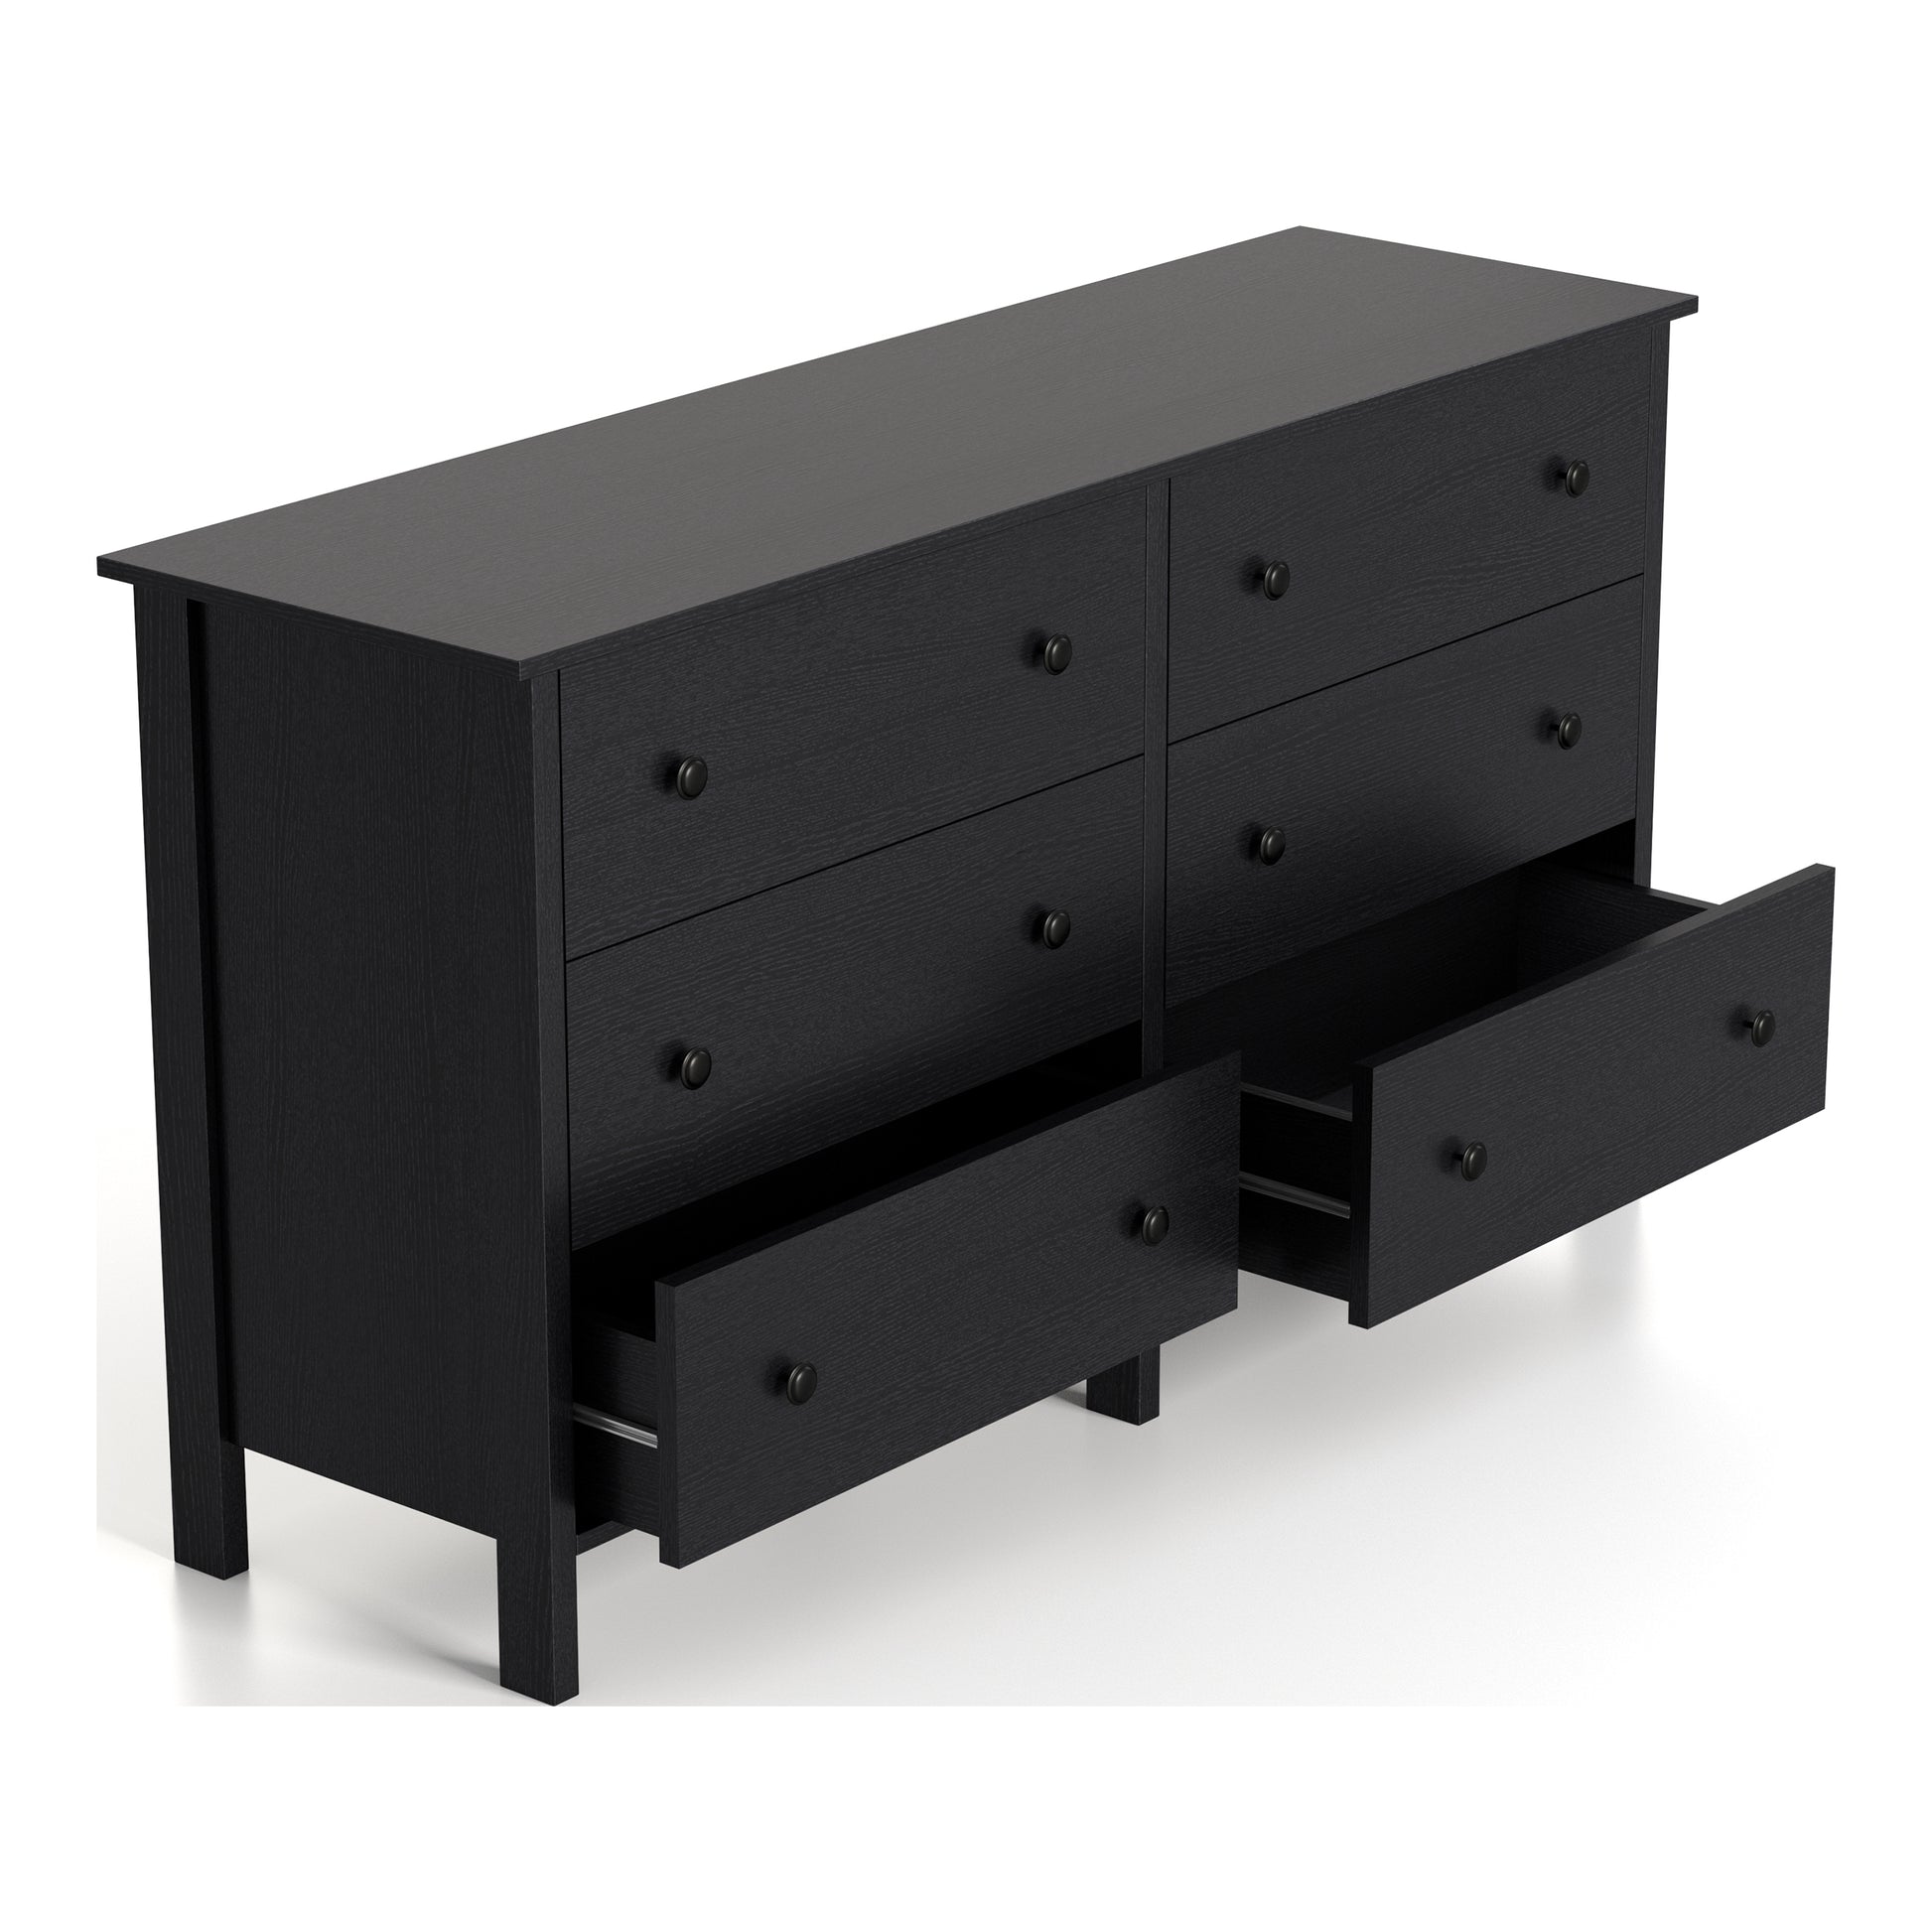 Right angled transitional black six-drawer youth dresser with bottom drawers open on a white background